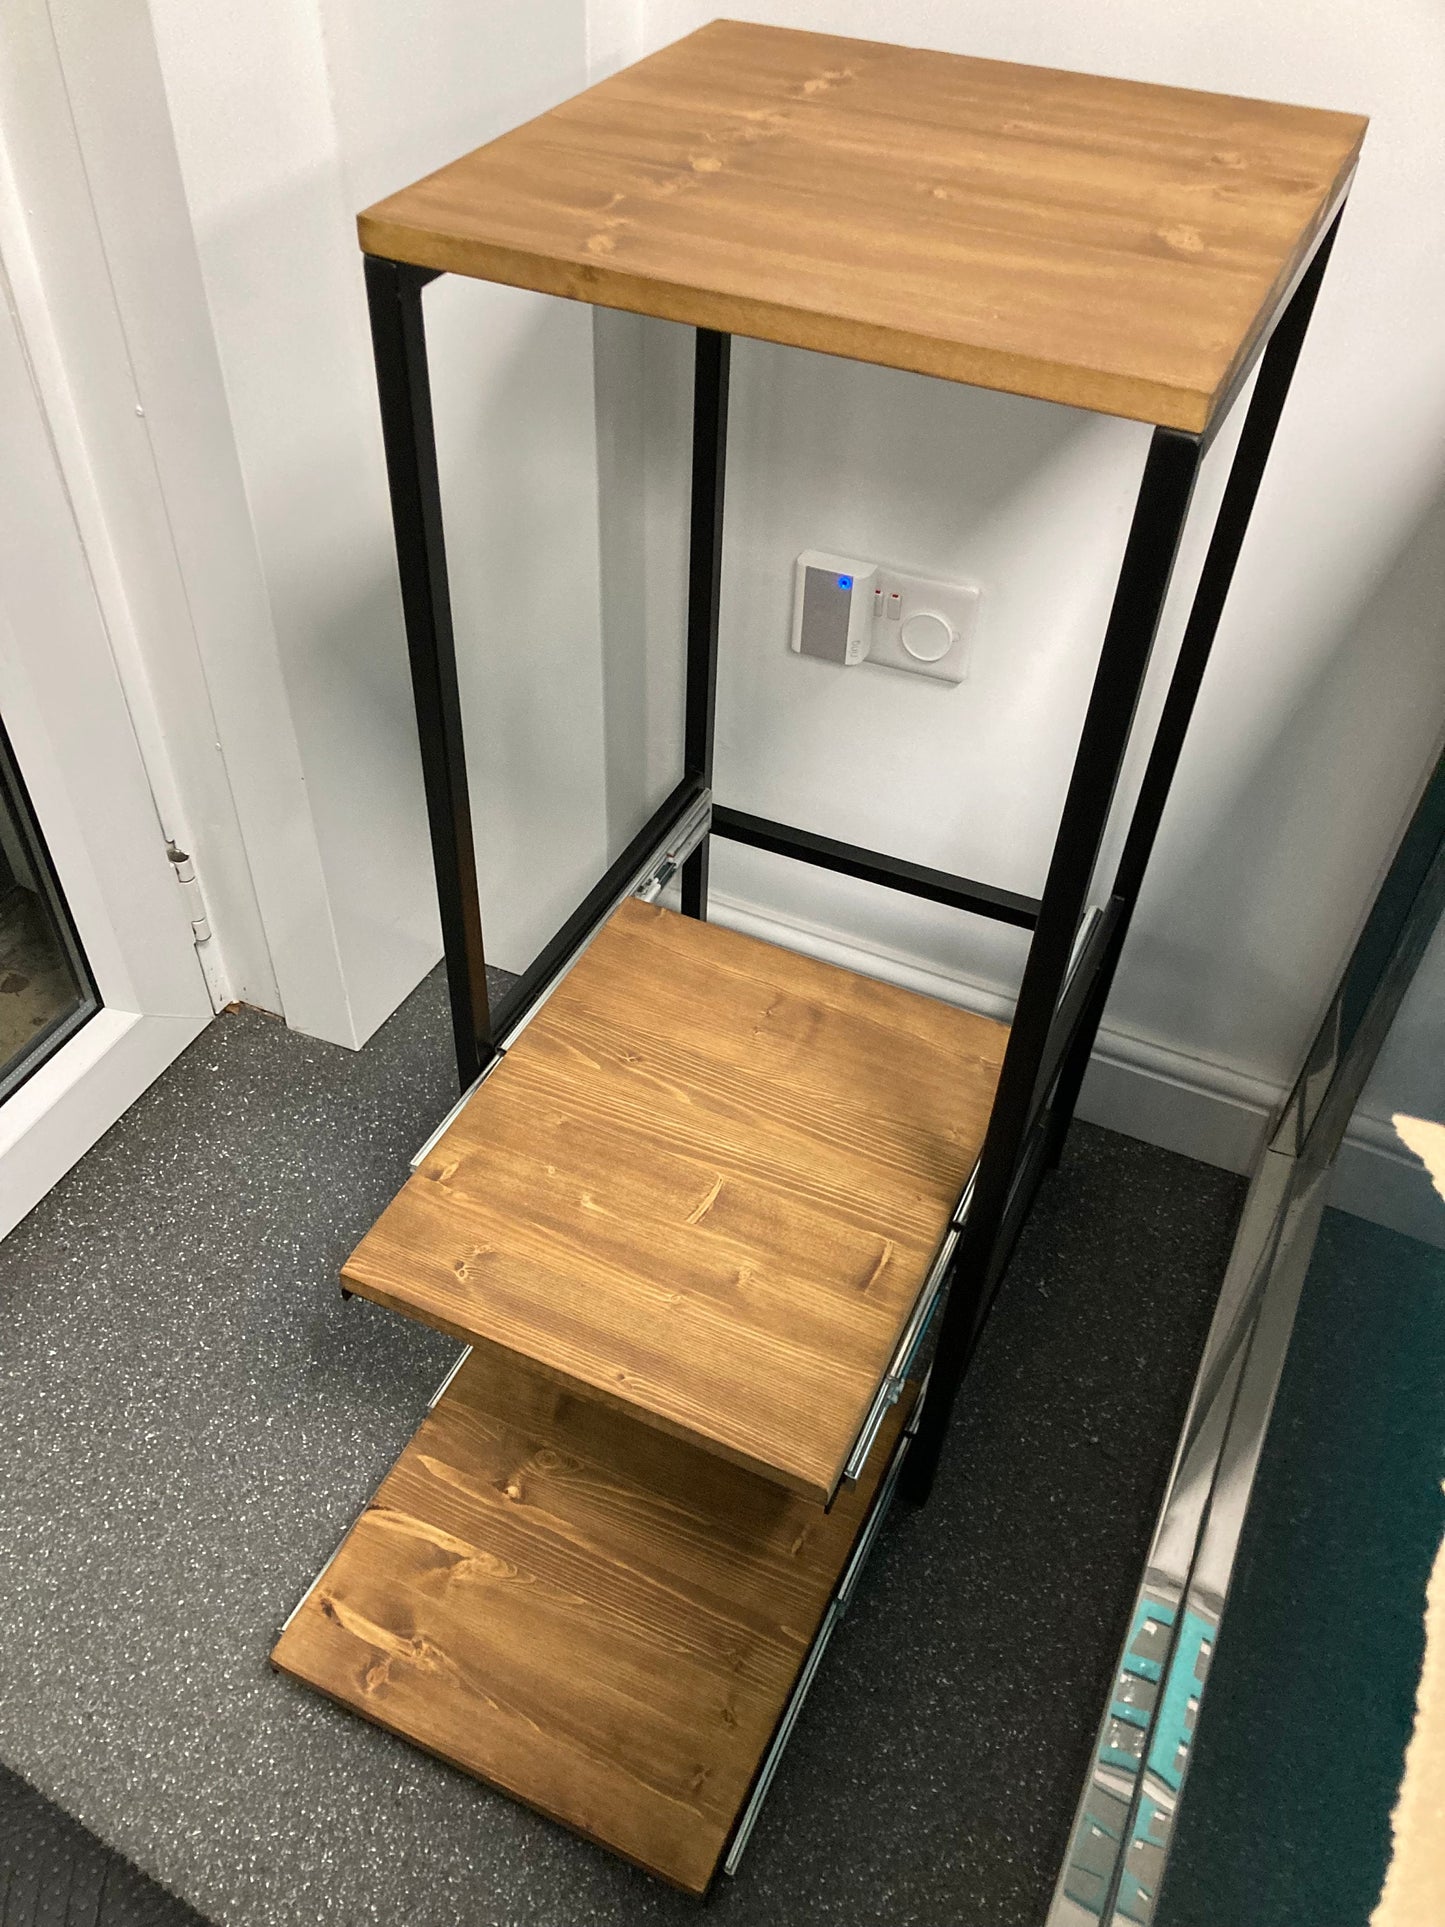 Equipment Stand with Pull out Shelves -3D printer stand - 3 Tier